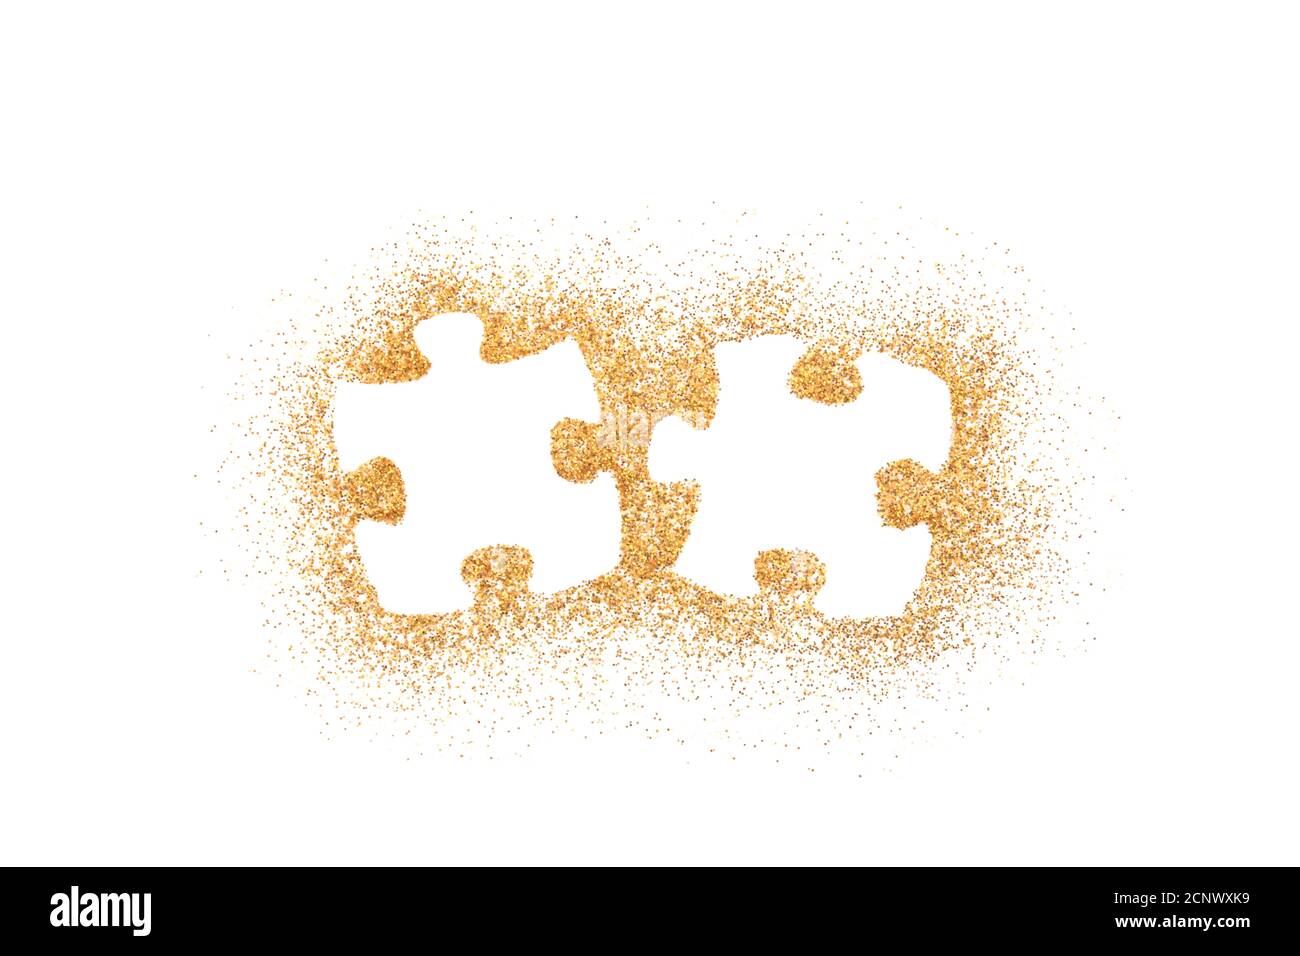 Pair of two matching puzzle pieces on golden glitter isolated on white background Stock Photo